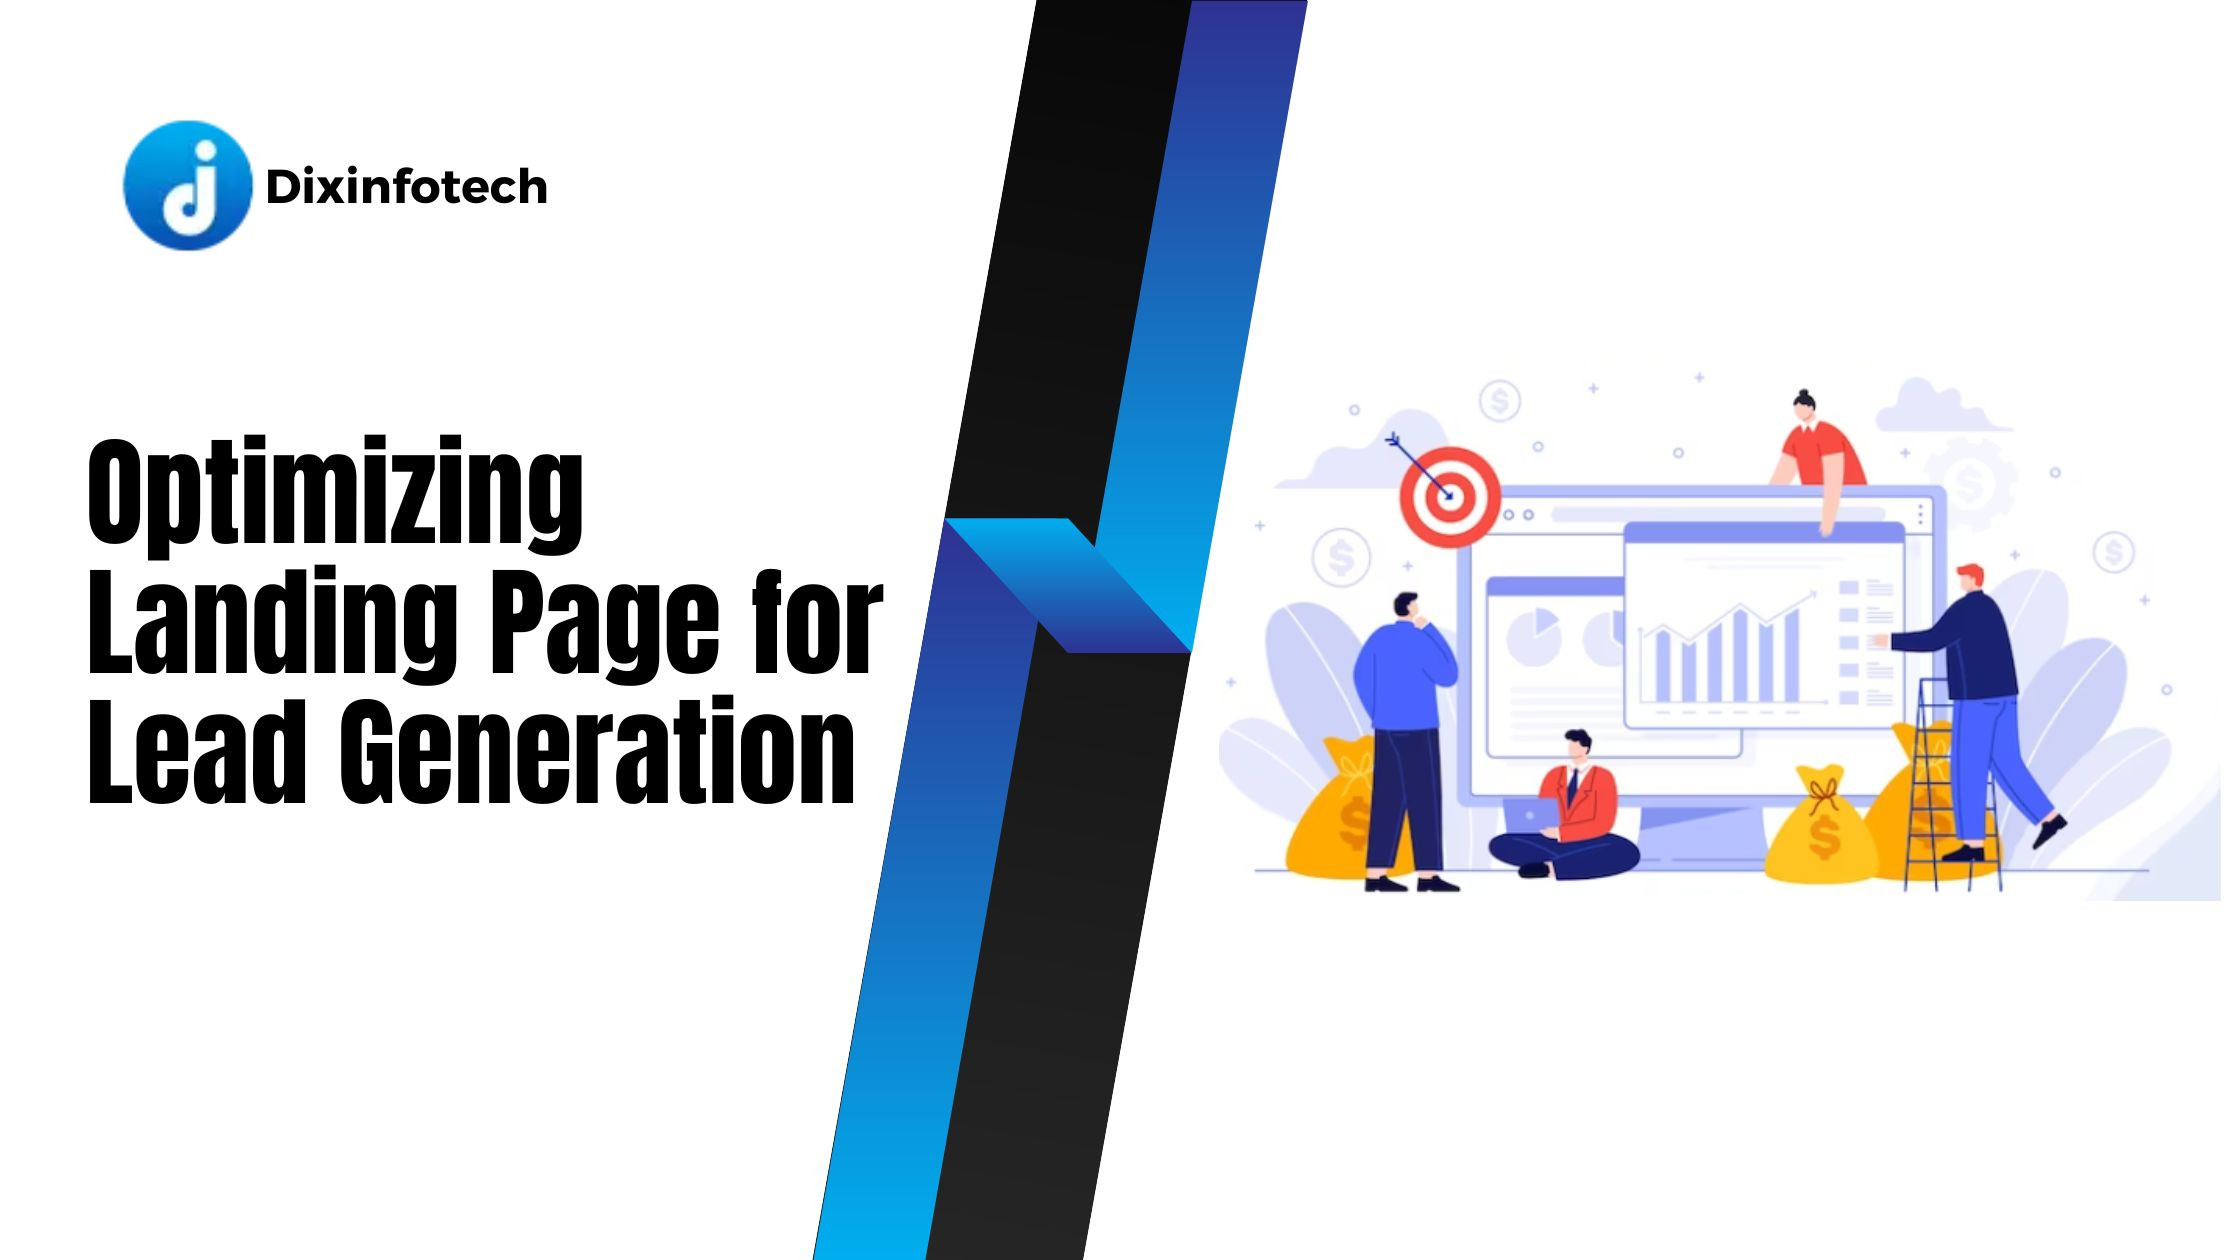 Optimizing Landing Page for Lead Generation